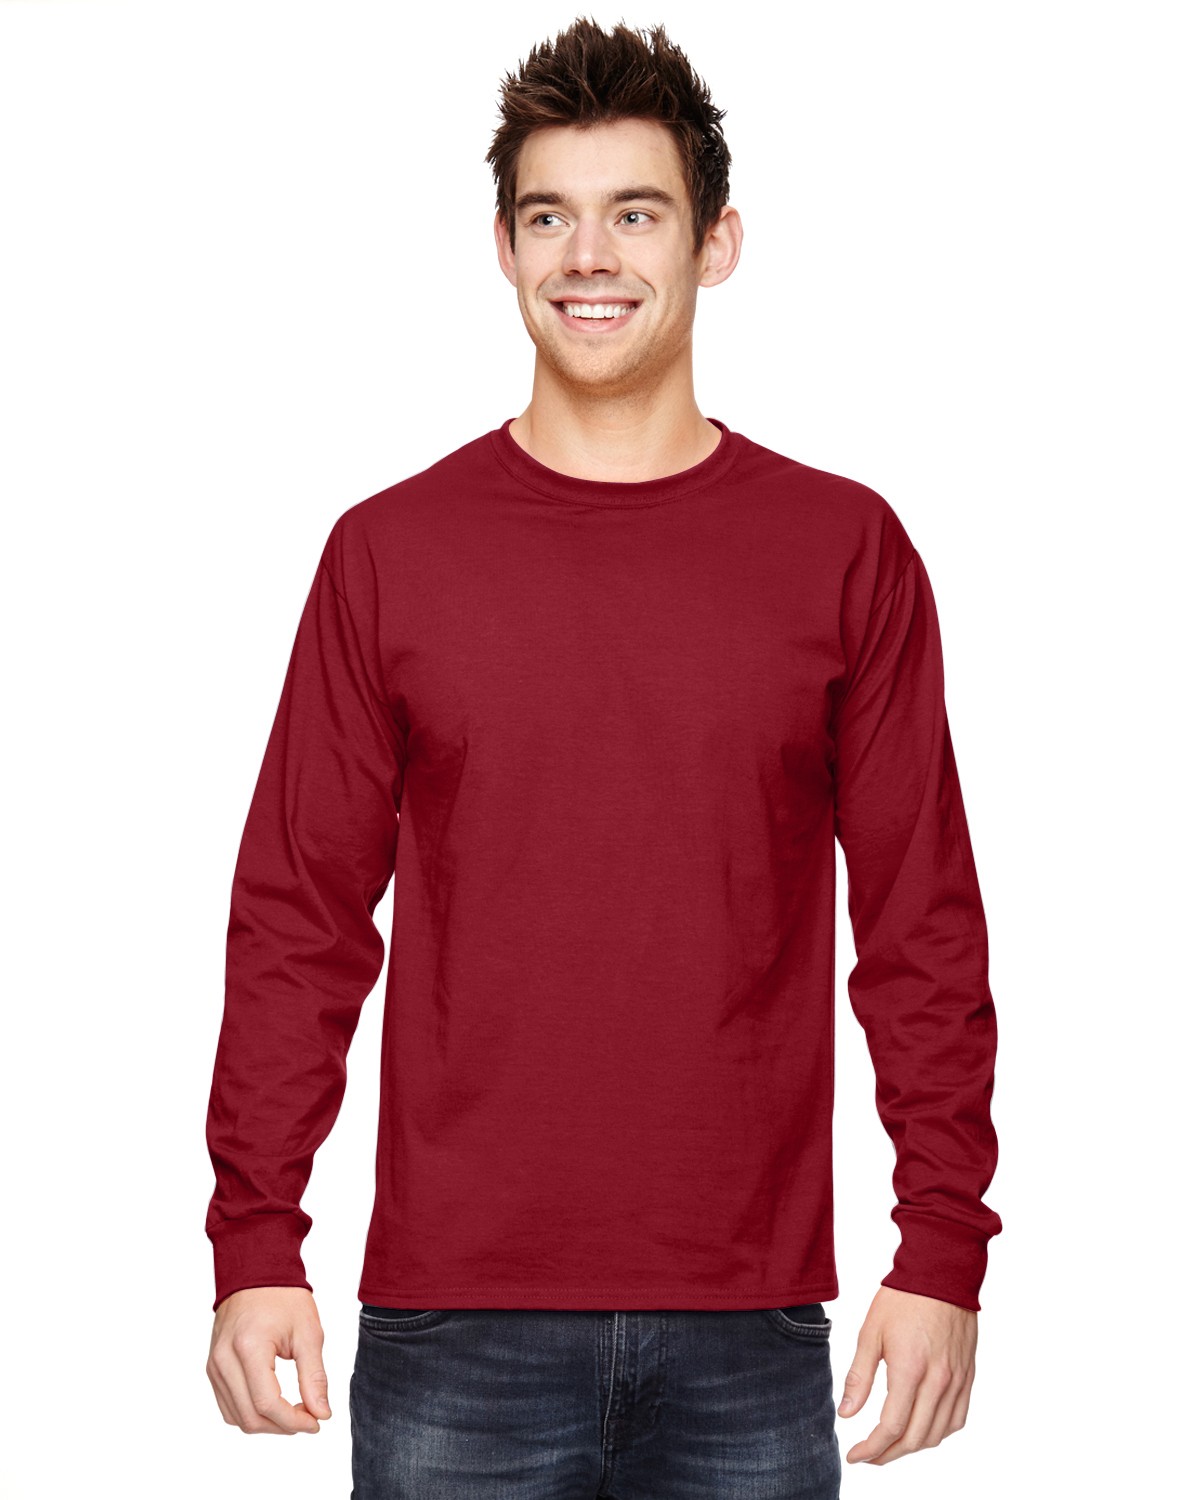 Fruit of the Loom 4930 Adult Hd Cotton Long-Sleeve T-Shirt